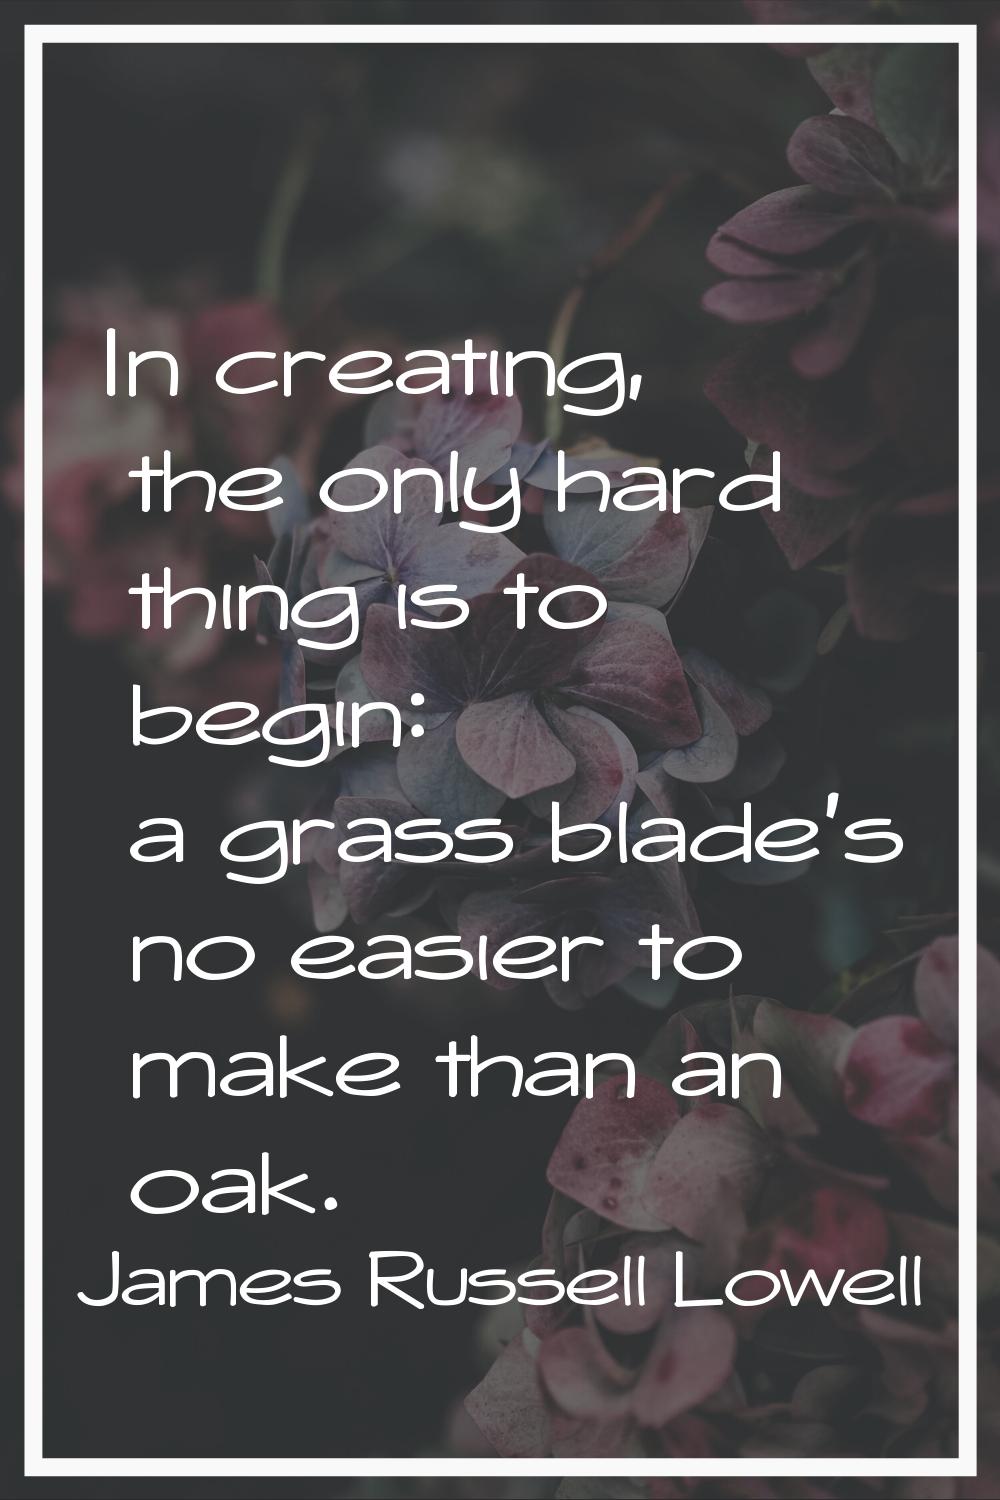 In creating, the only hard thing is to begin: a grass blade's no easier to make than an oak.